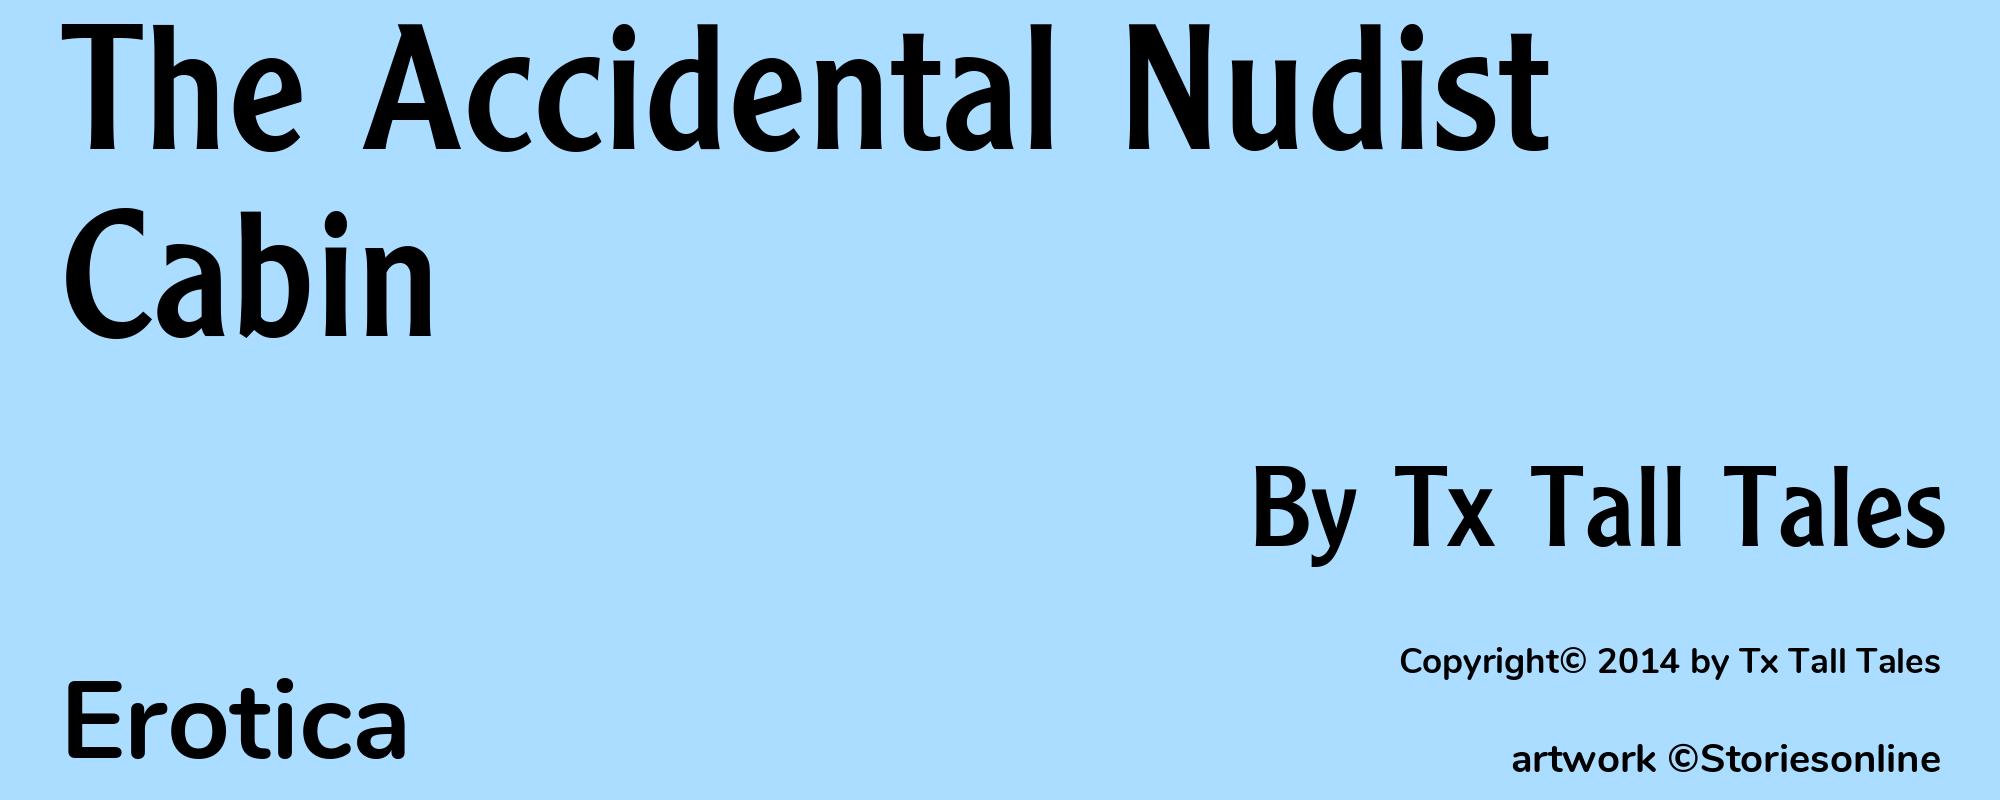 The Accidental Nudist Cabin - Cover